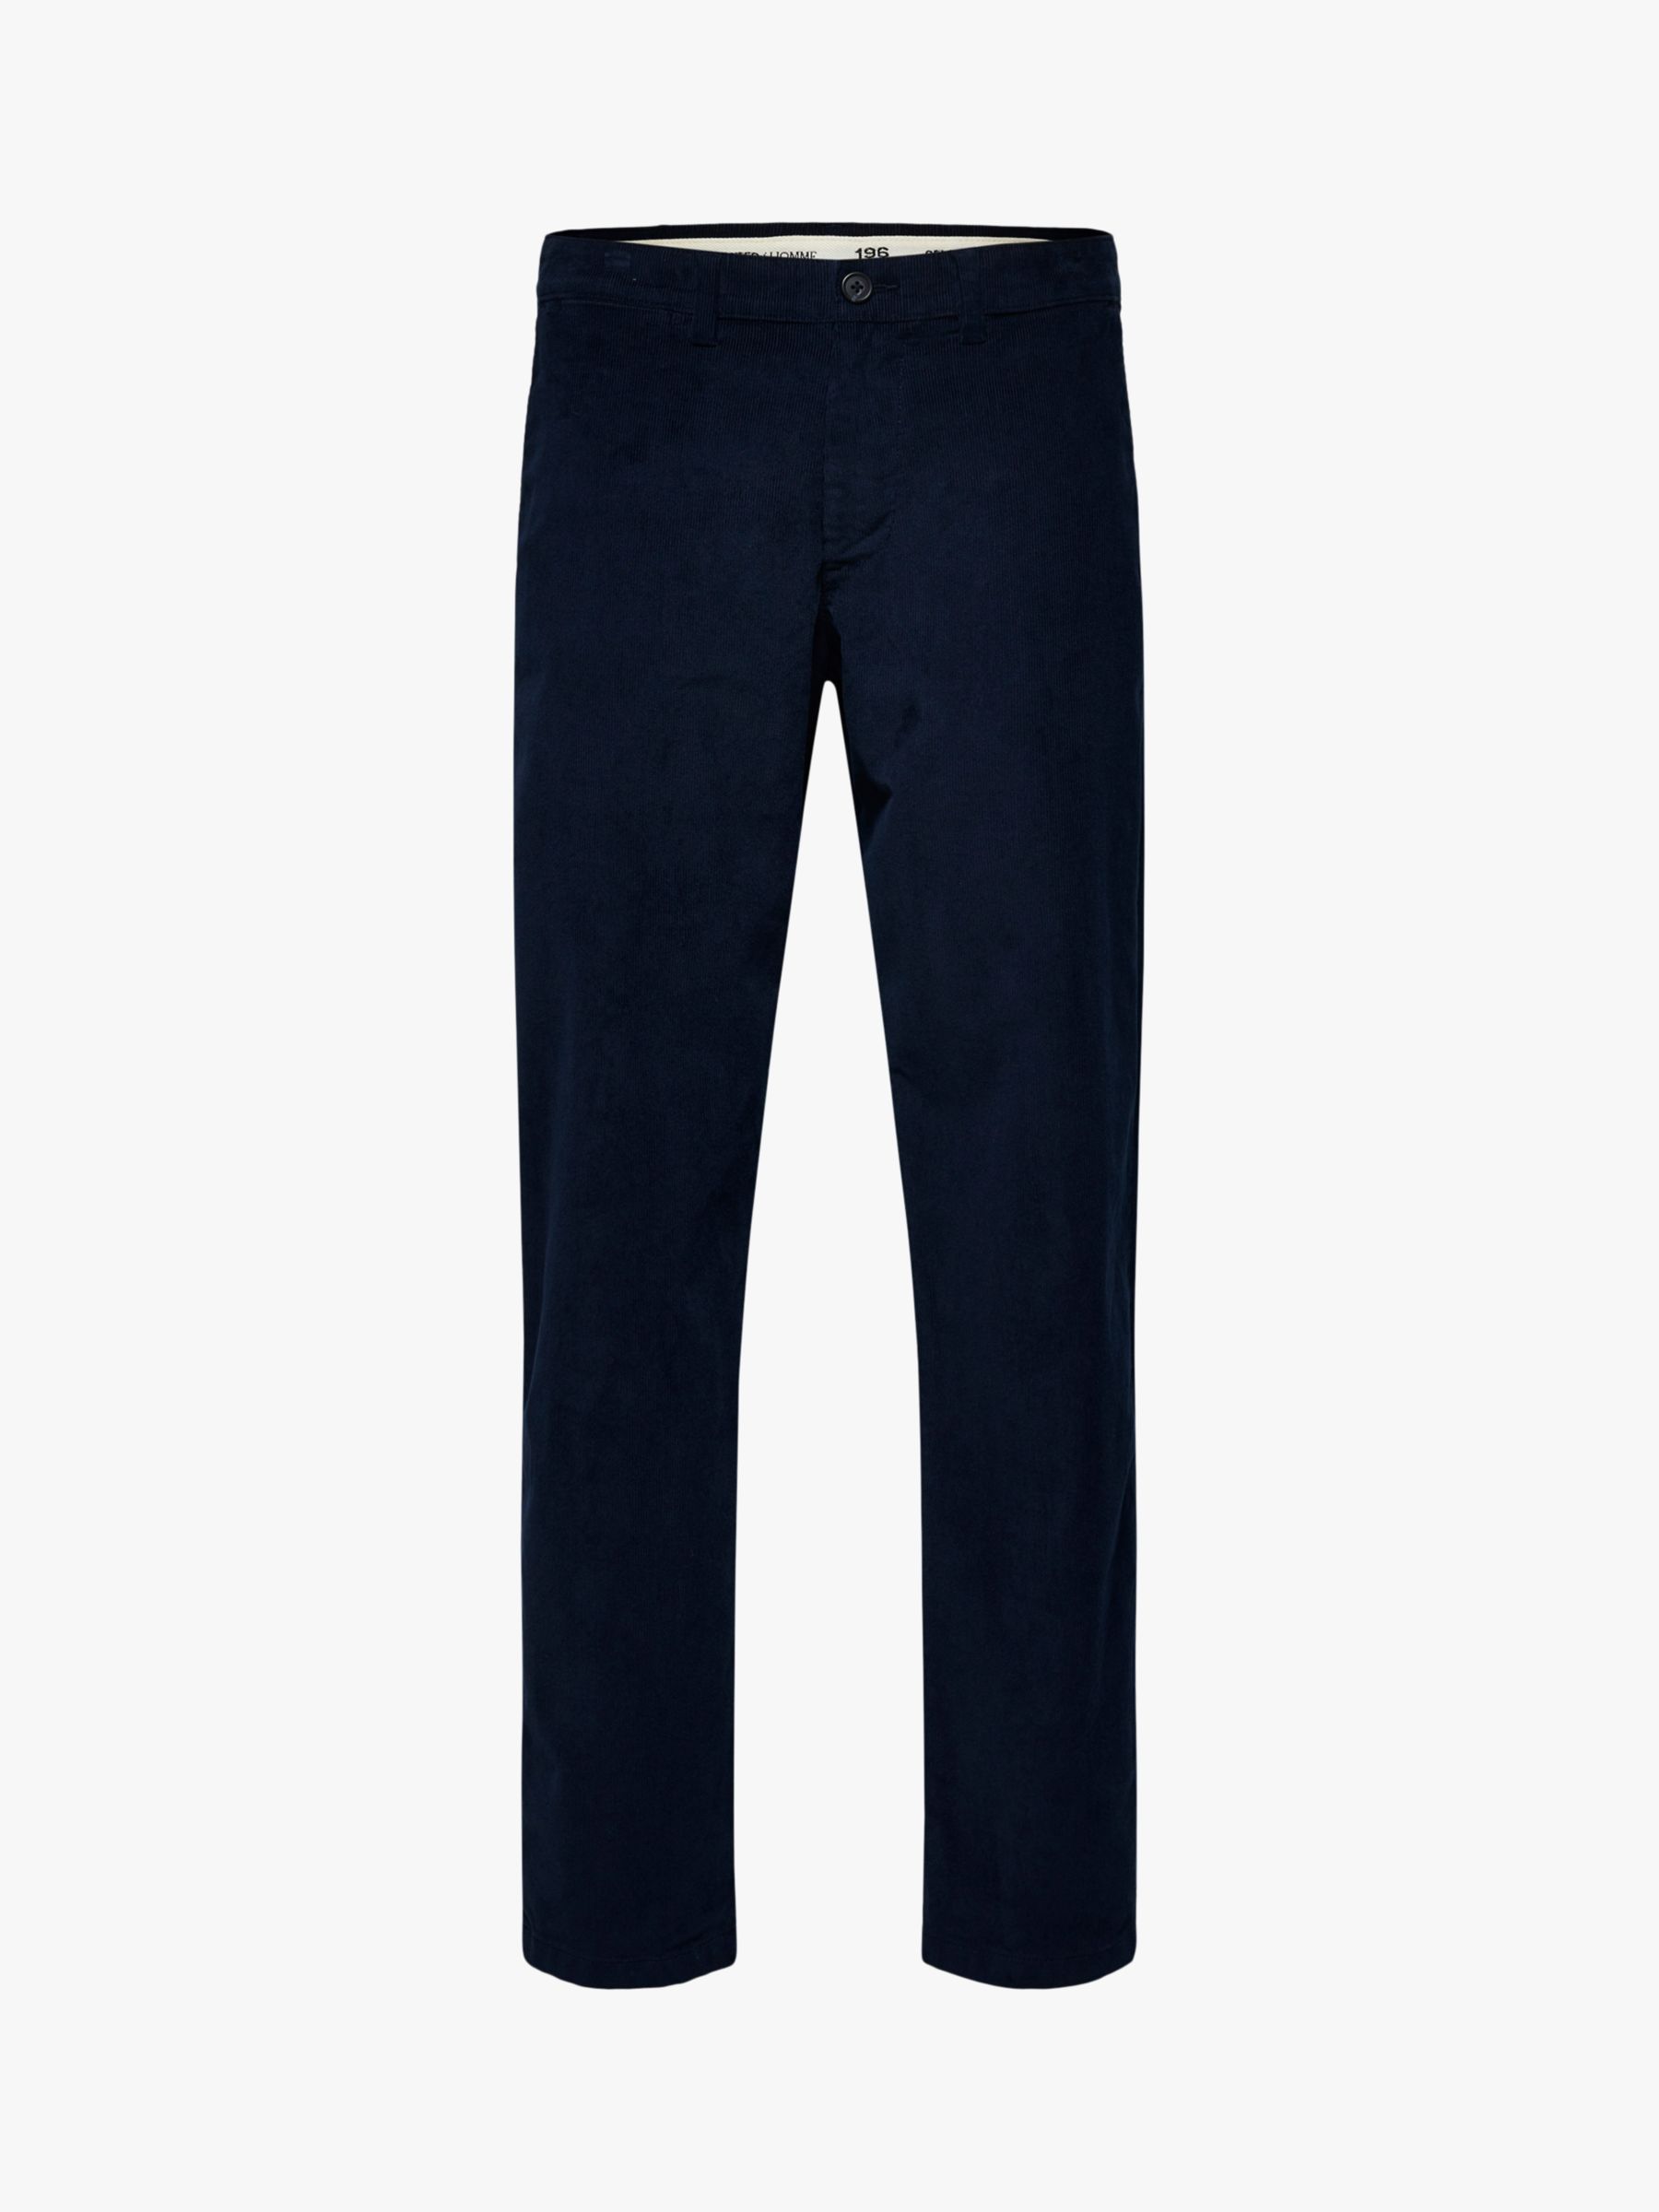 Buy SELECTED HOMME Classic Chino Trousers Online at johnlewis.com